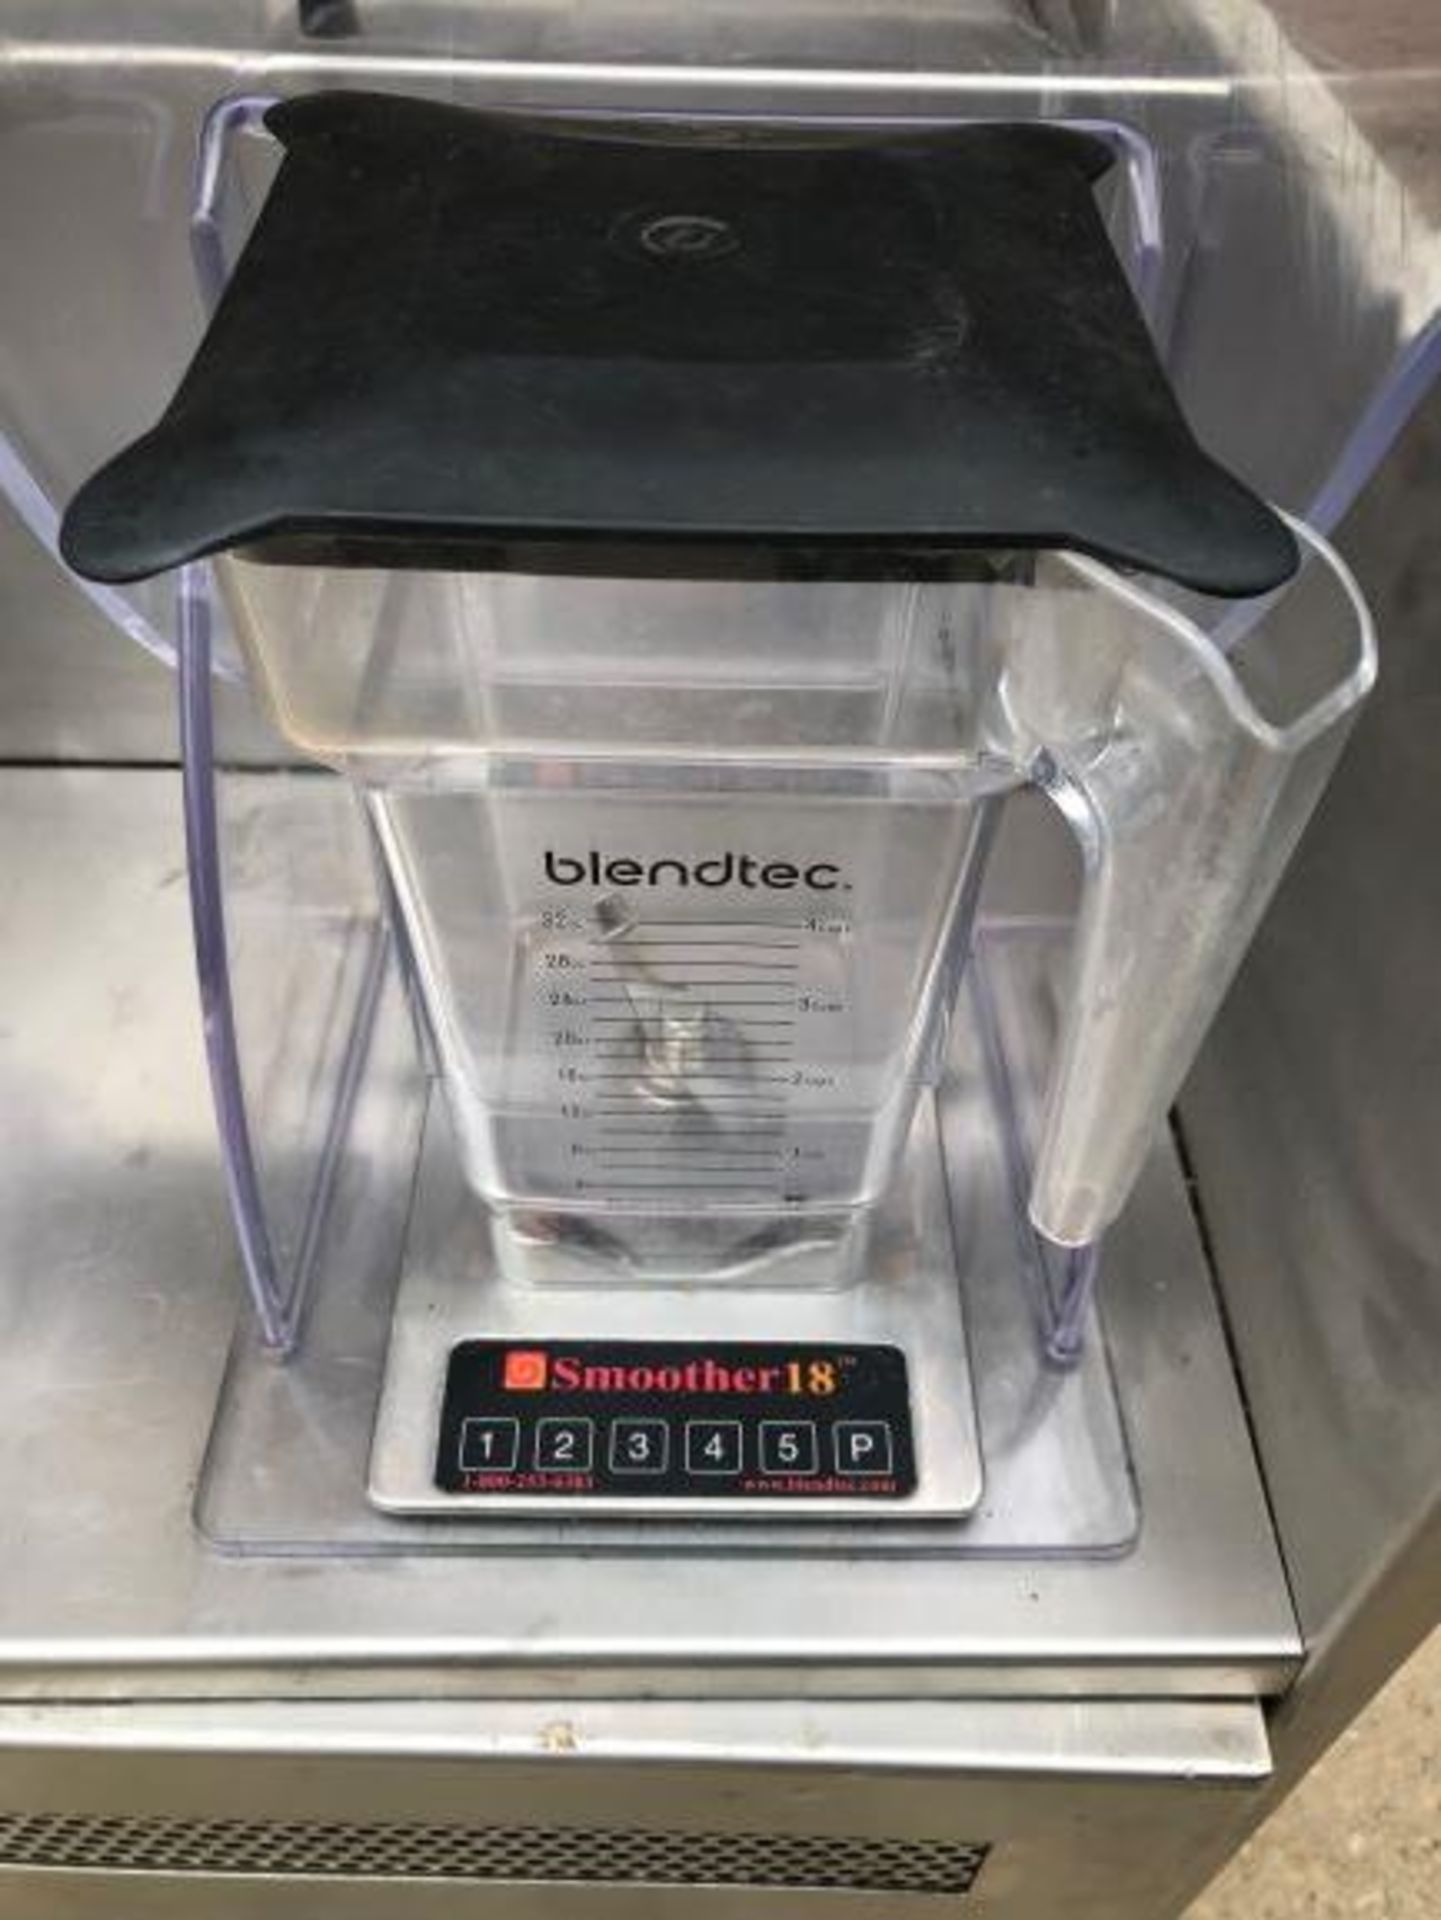 Twin Station Blendtec Smoother 18 Commercial Blender Stainless Steel Refrigerated Counter - Image 3 of 4